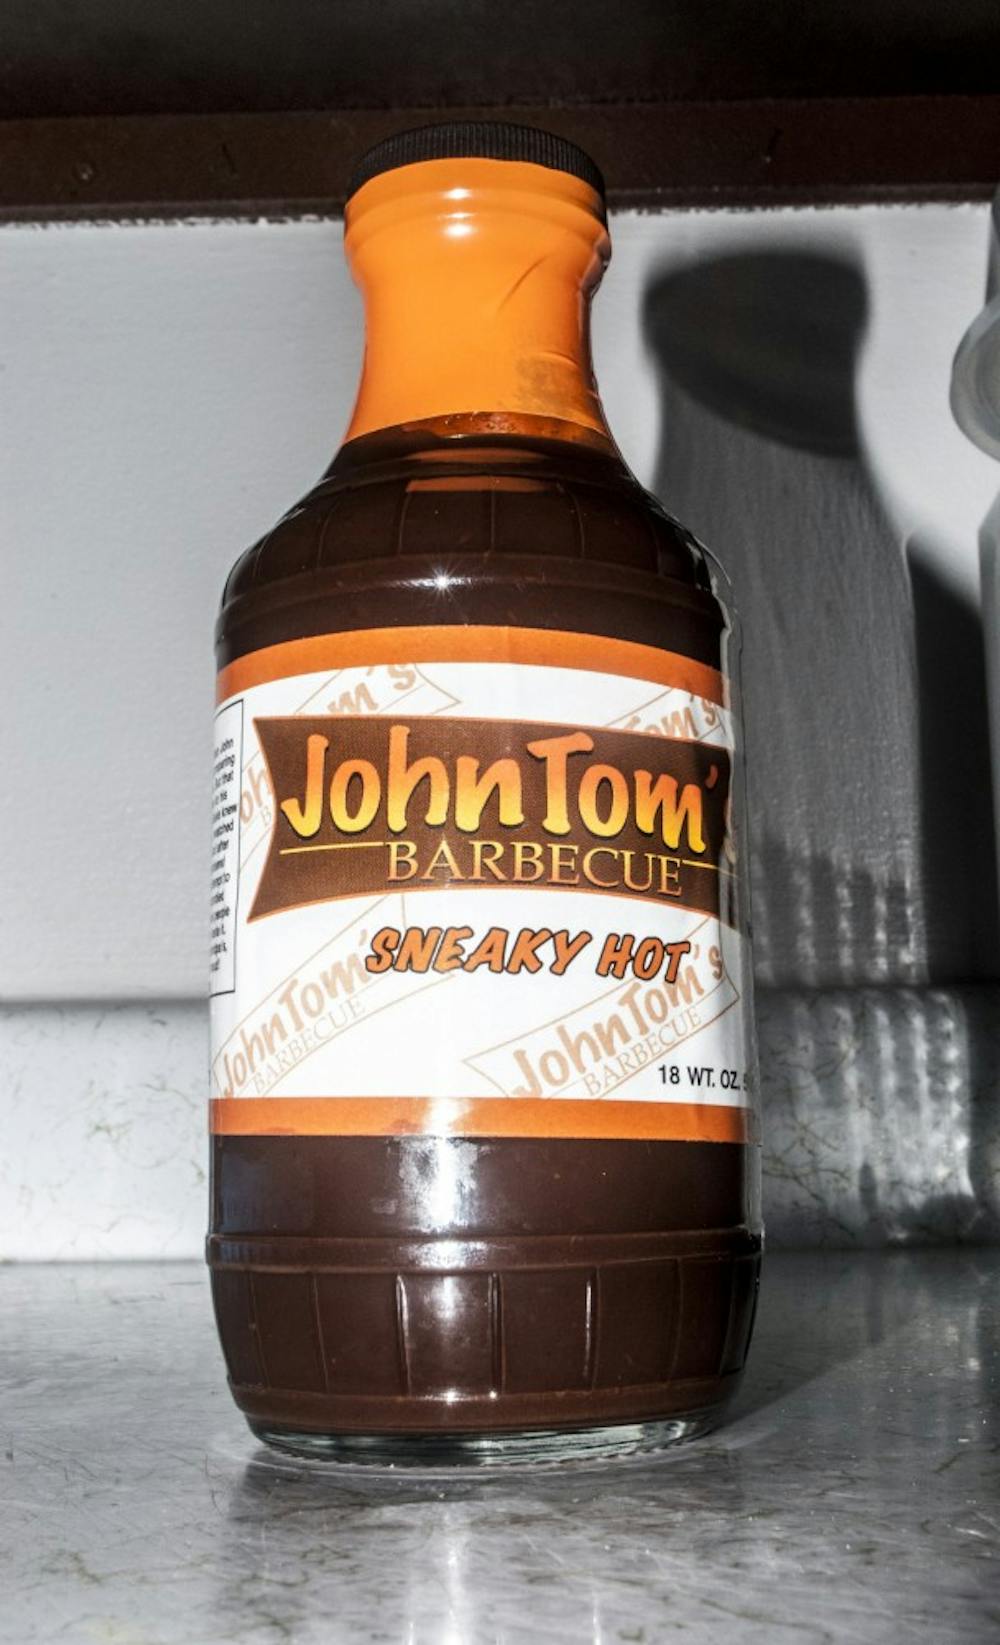 JohnTom's Barbecue Sauce was founded by Pegues in 2006. This year, Ball State Dining Services started using it in all of their barbecue recipies. DN PHOTO COLIN GRYLLS